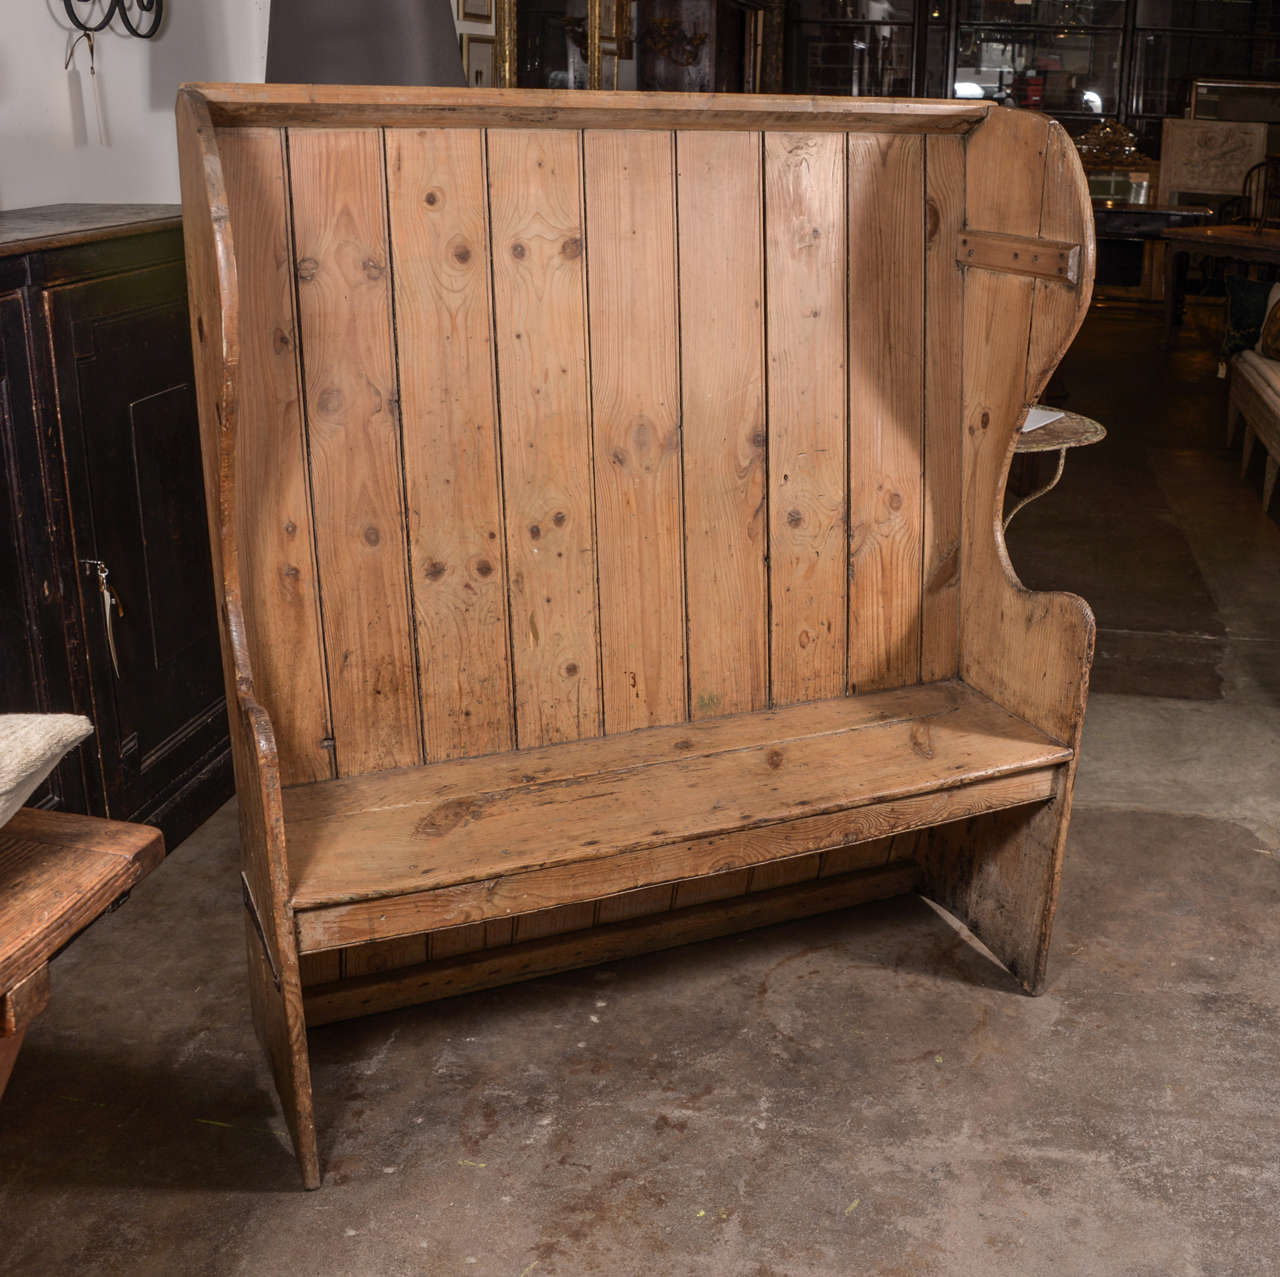 19th century pub pine settle with free-standing grooved back, circa 1890.